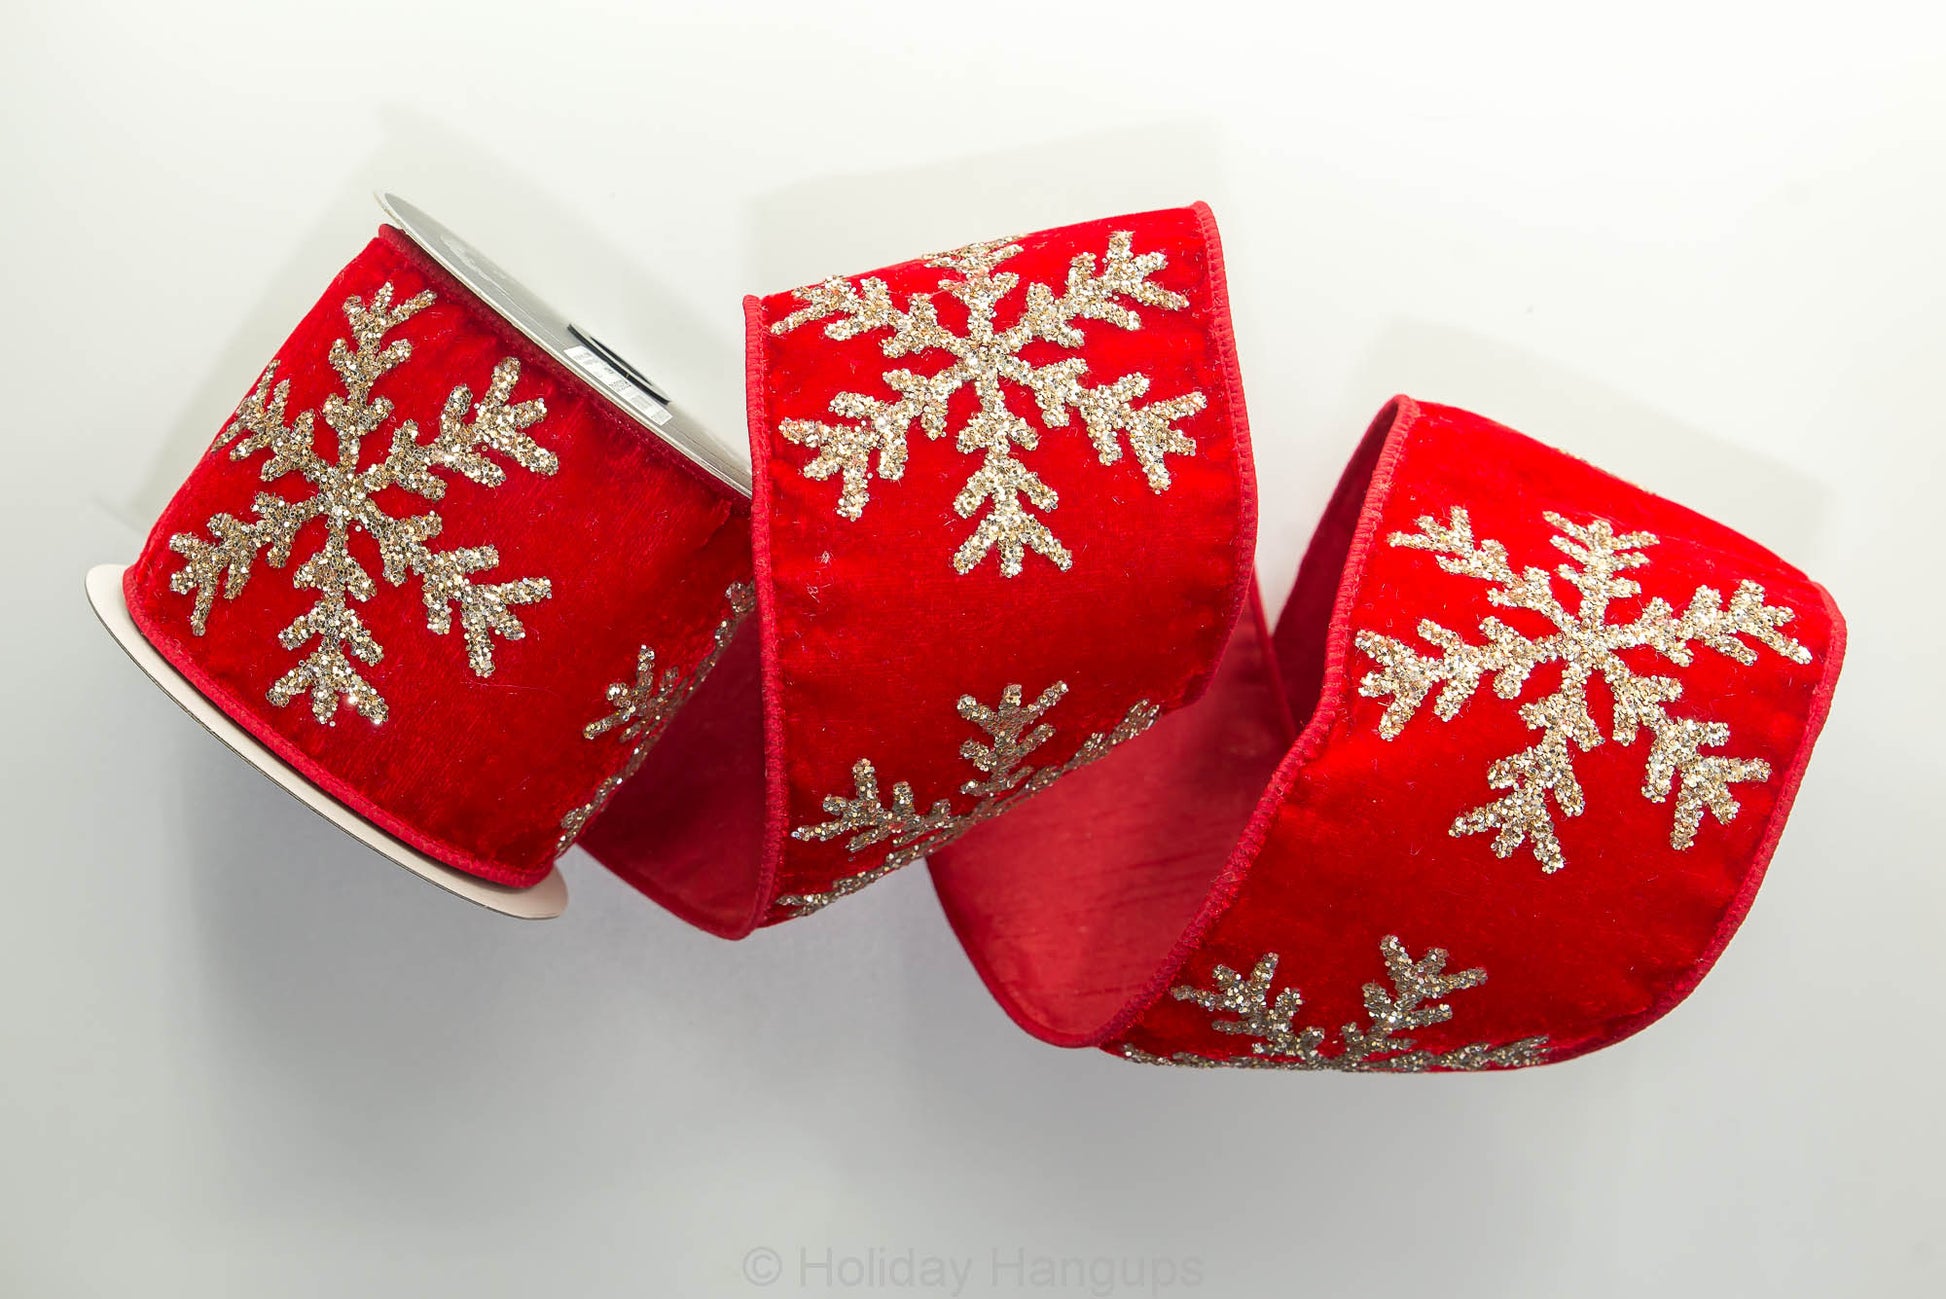 Designer Christmas ribbon, wired ribbon, wired Christmas ribbon, Christmas tree ribbon, wide Christmas ribbon, 4 inch wired Christmas ribbon, luxury Christmas tree ribbon, wide wired Christmas ribbon, Christmas tree ribbon, wired Christmas tree ribbon, Christmas tree decorations